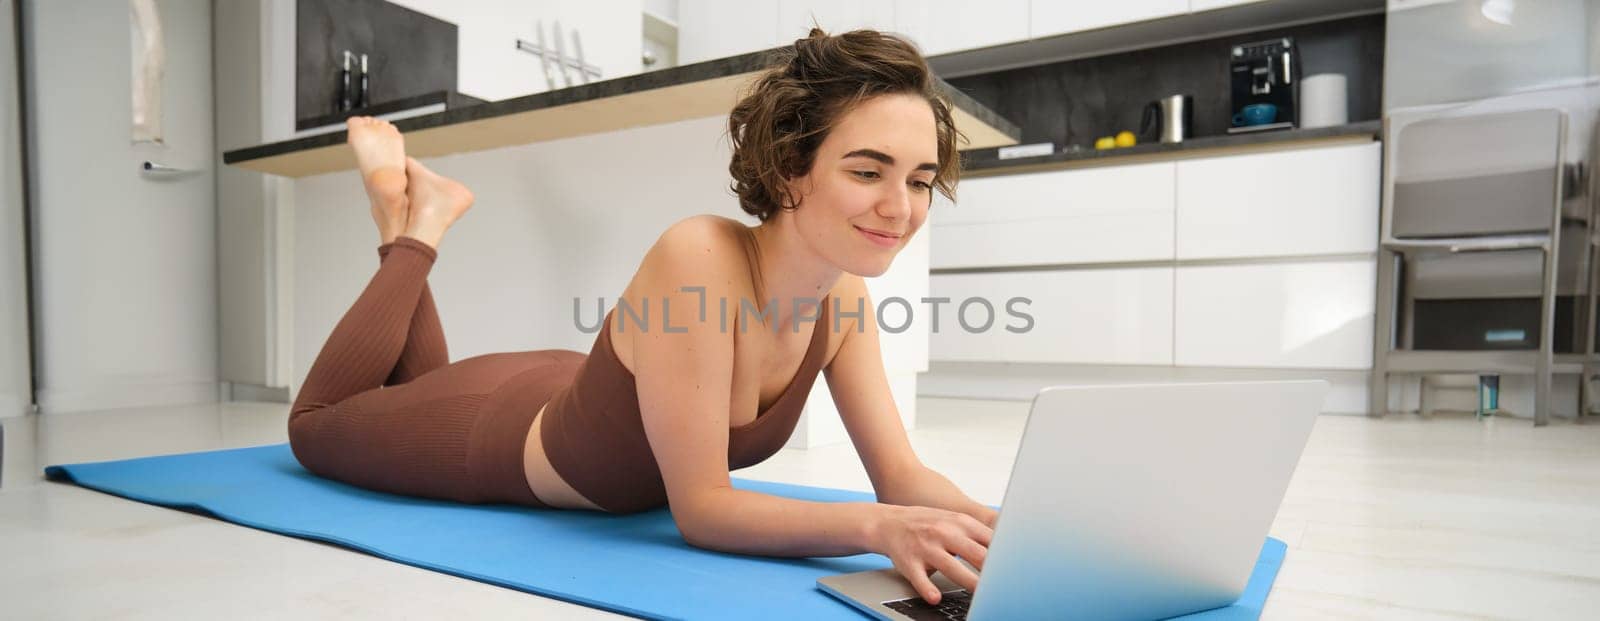 Portrait of beautiful sportswoman, fitness girl watching videos on laptop during workout, follow online pilates videos while exercise at home, wearing activewear in kitchen.